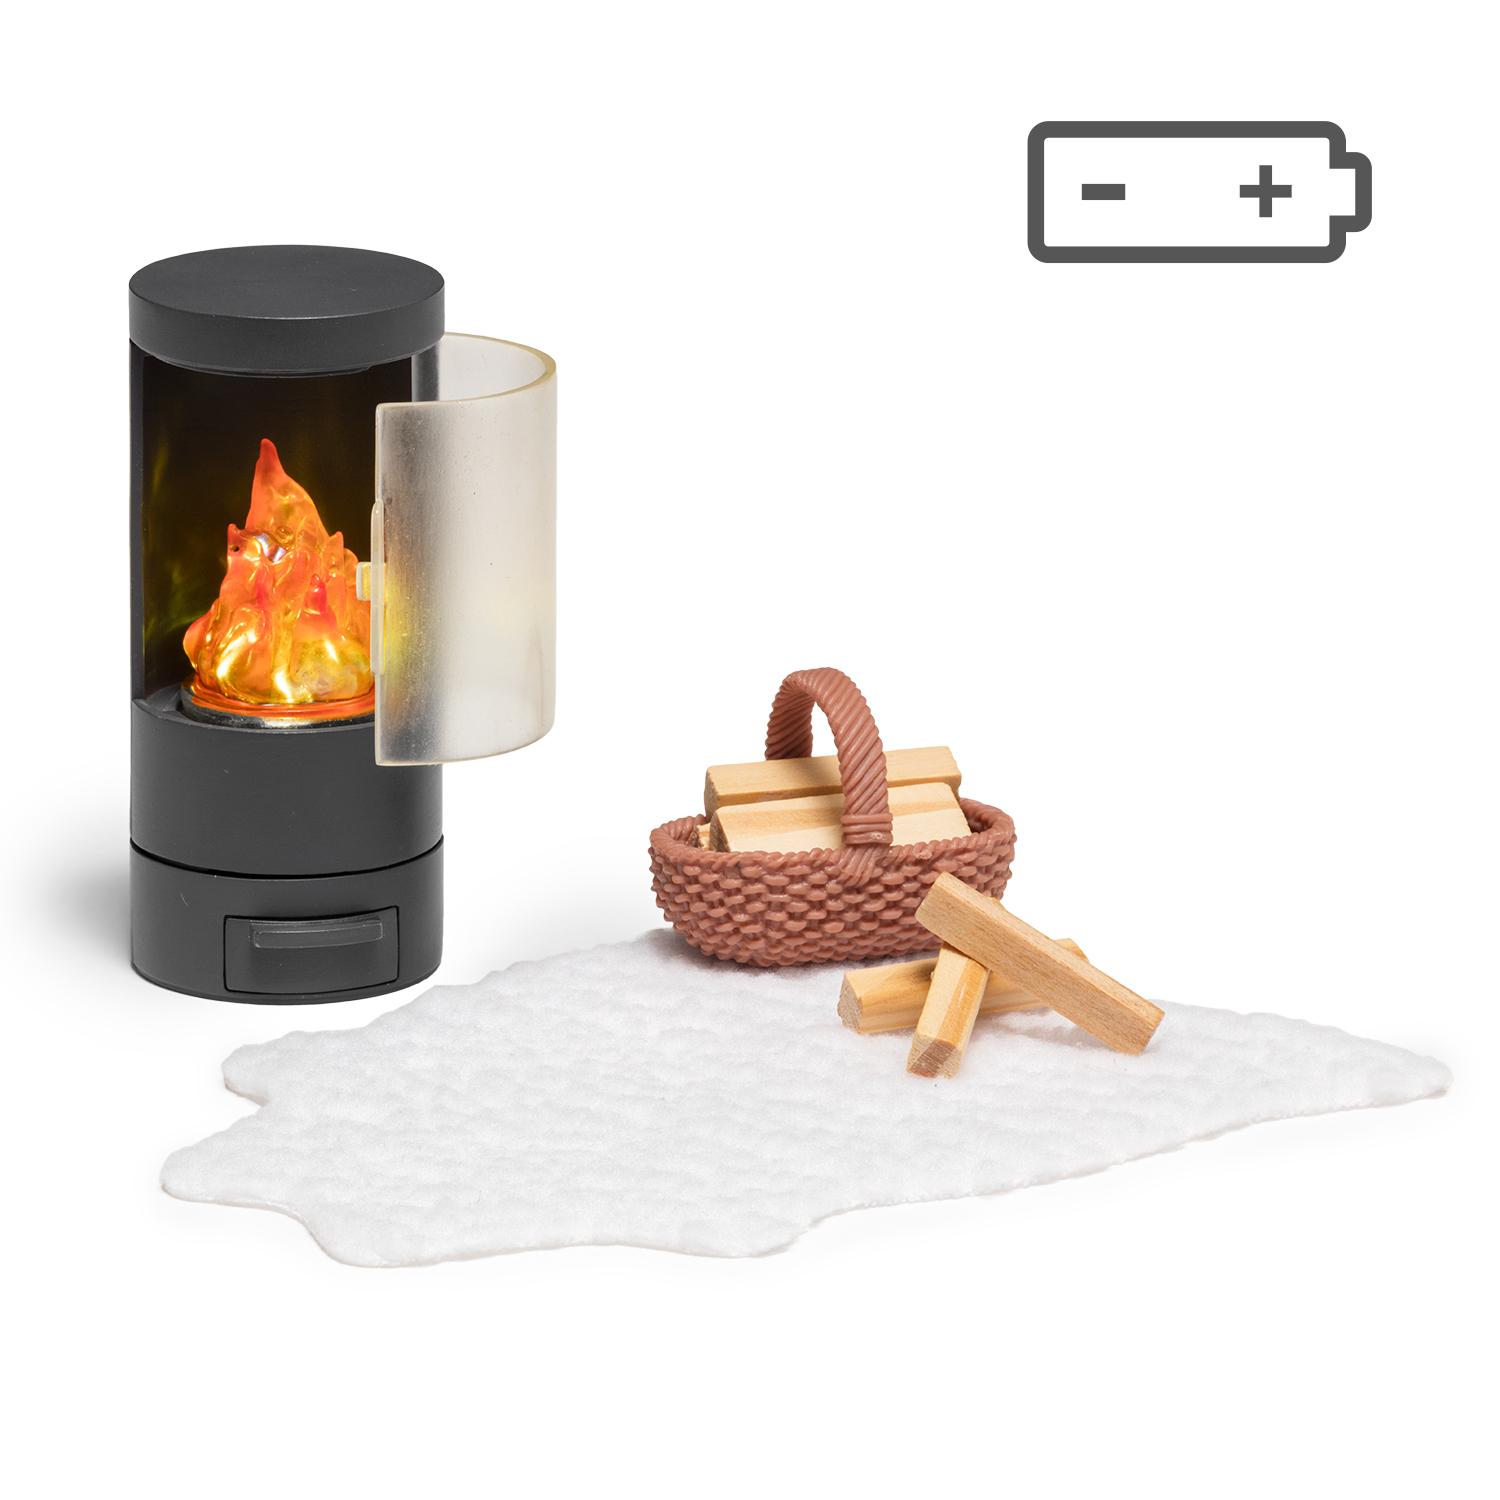 Doll house furniture & doll house accessories lundby dollhouse furniture log burner set with lighting